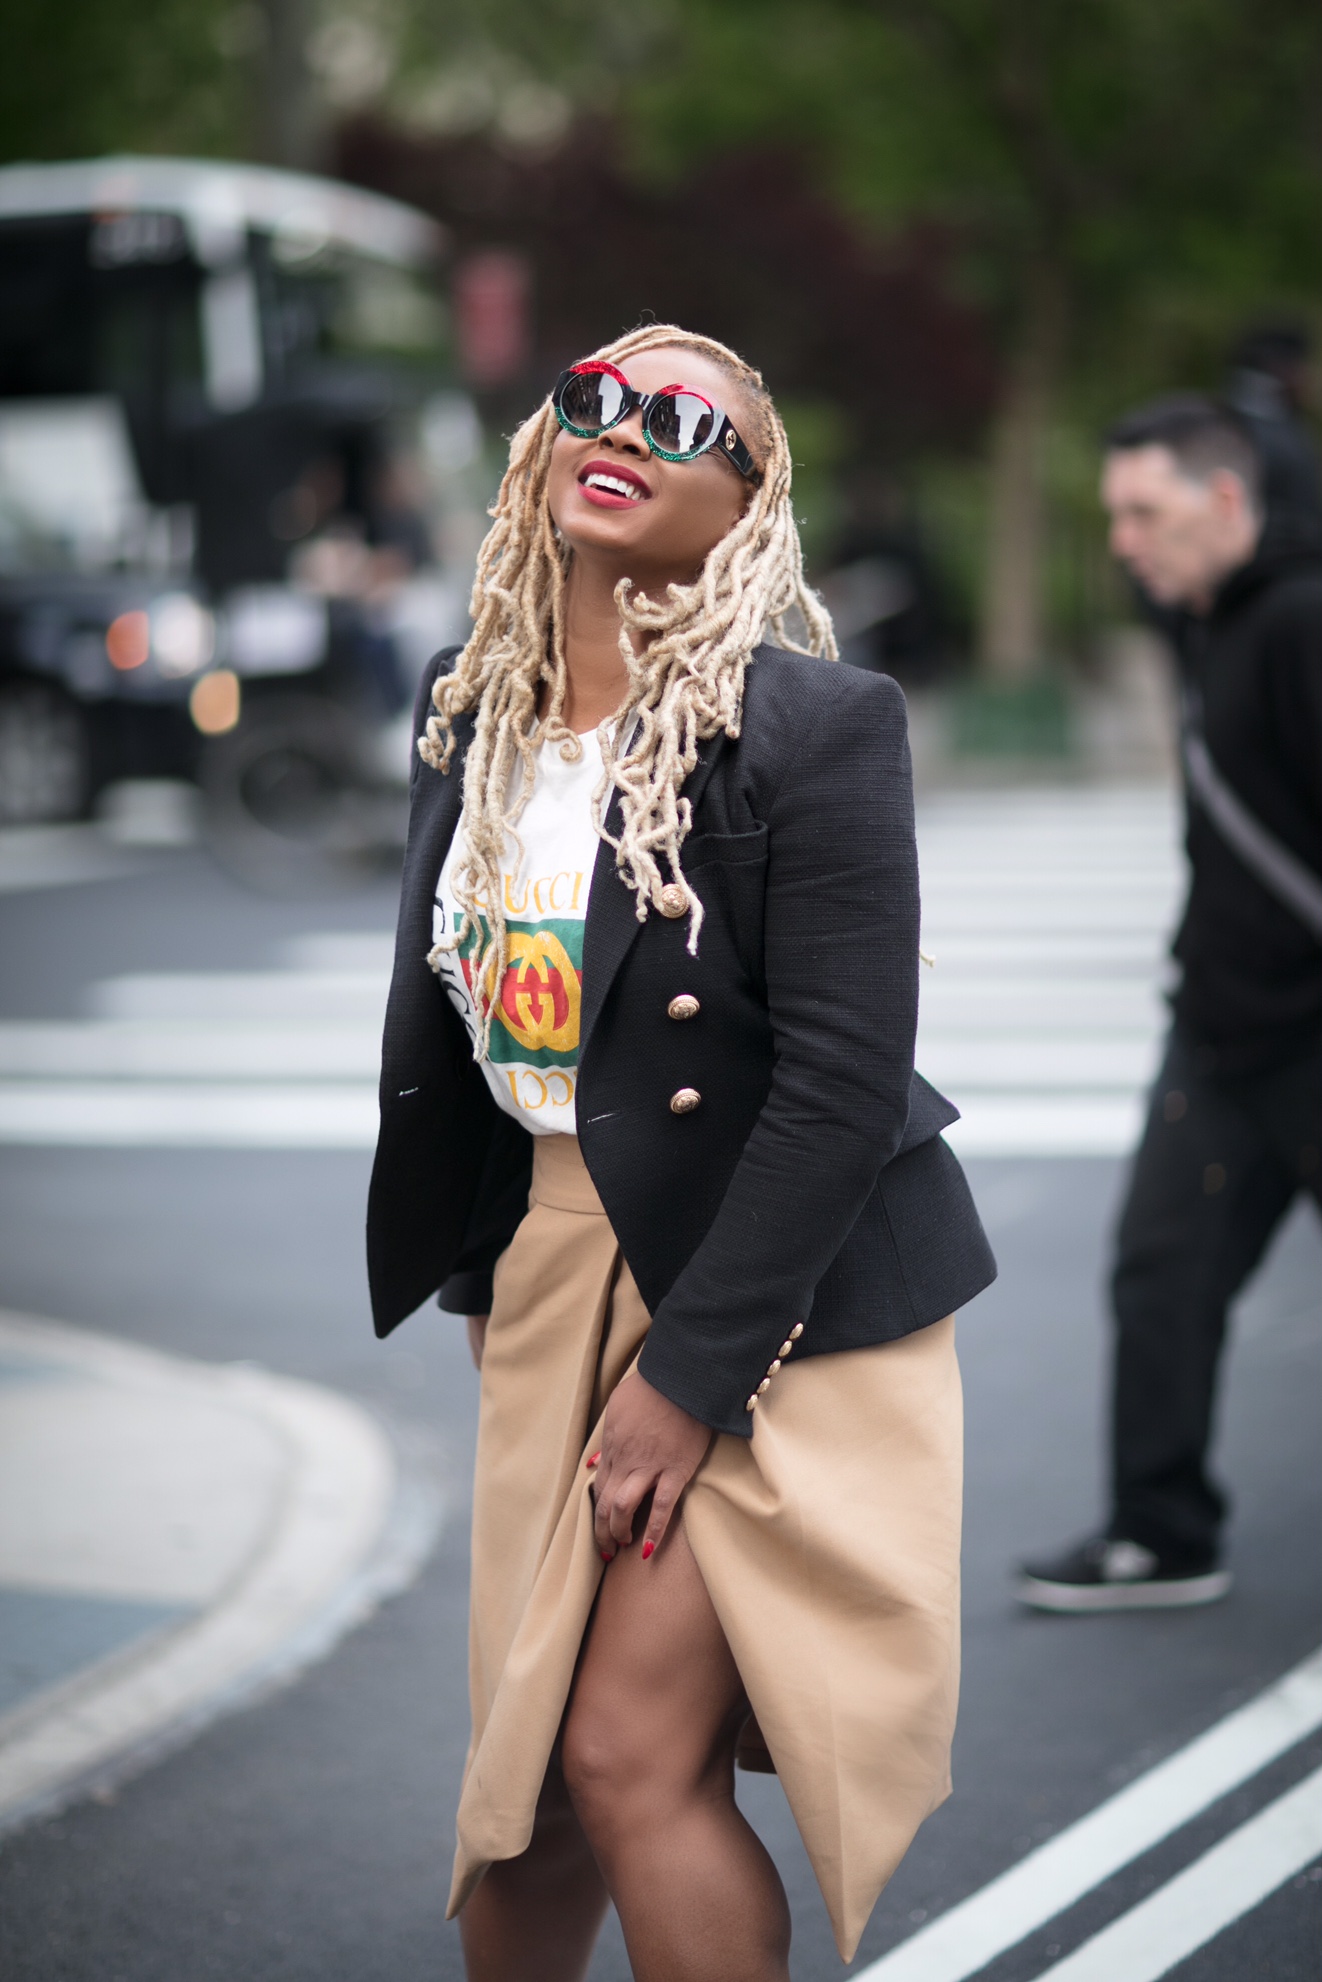 3-claire-sulmers-blogger-african-american-fashion-bomb-daily-black-gucci-logo-t-shirt-balmain-jacket-three-color-acetate-glitter-sunglasses-black-red-green